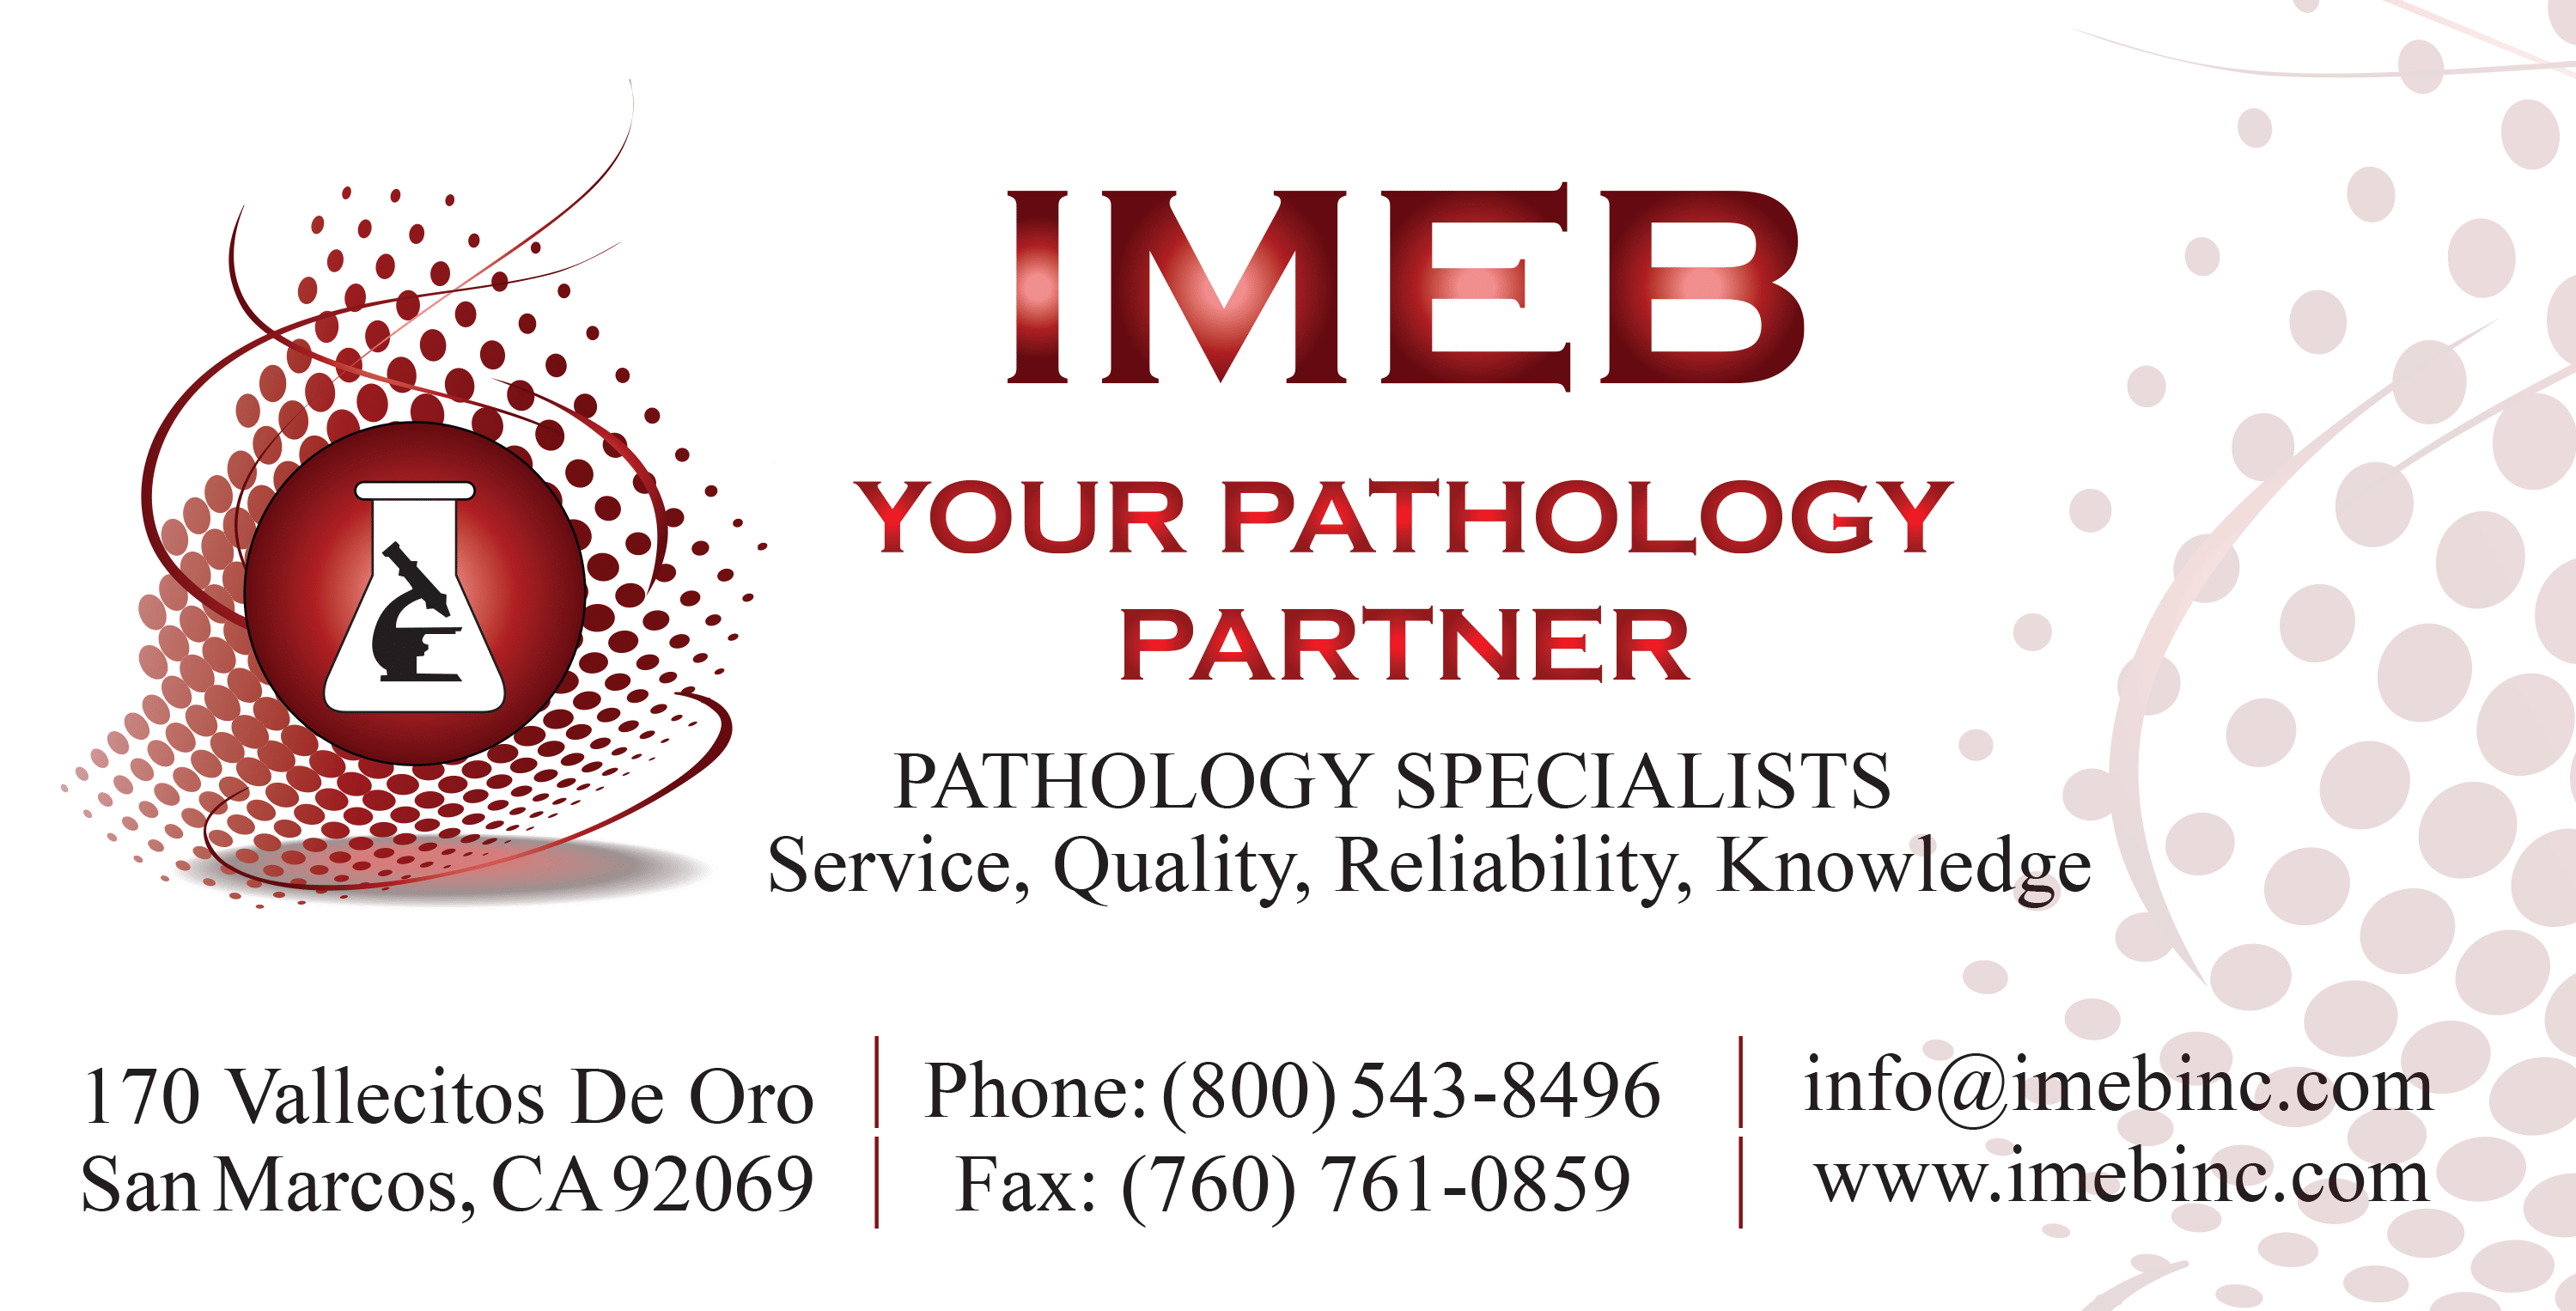 IMEB Your Pathology Specialist Partner information graphic